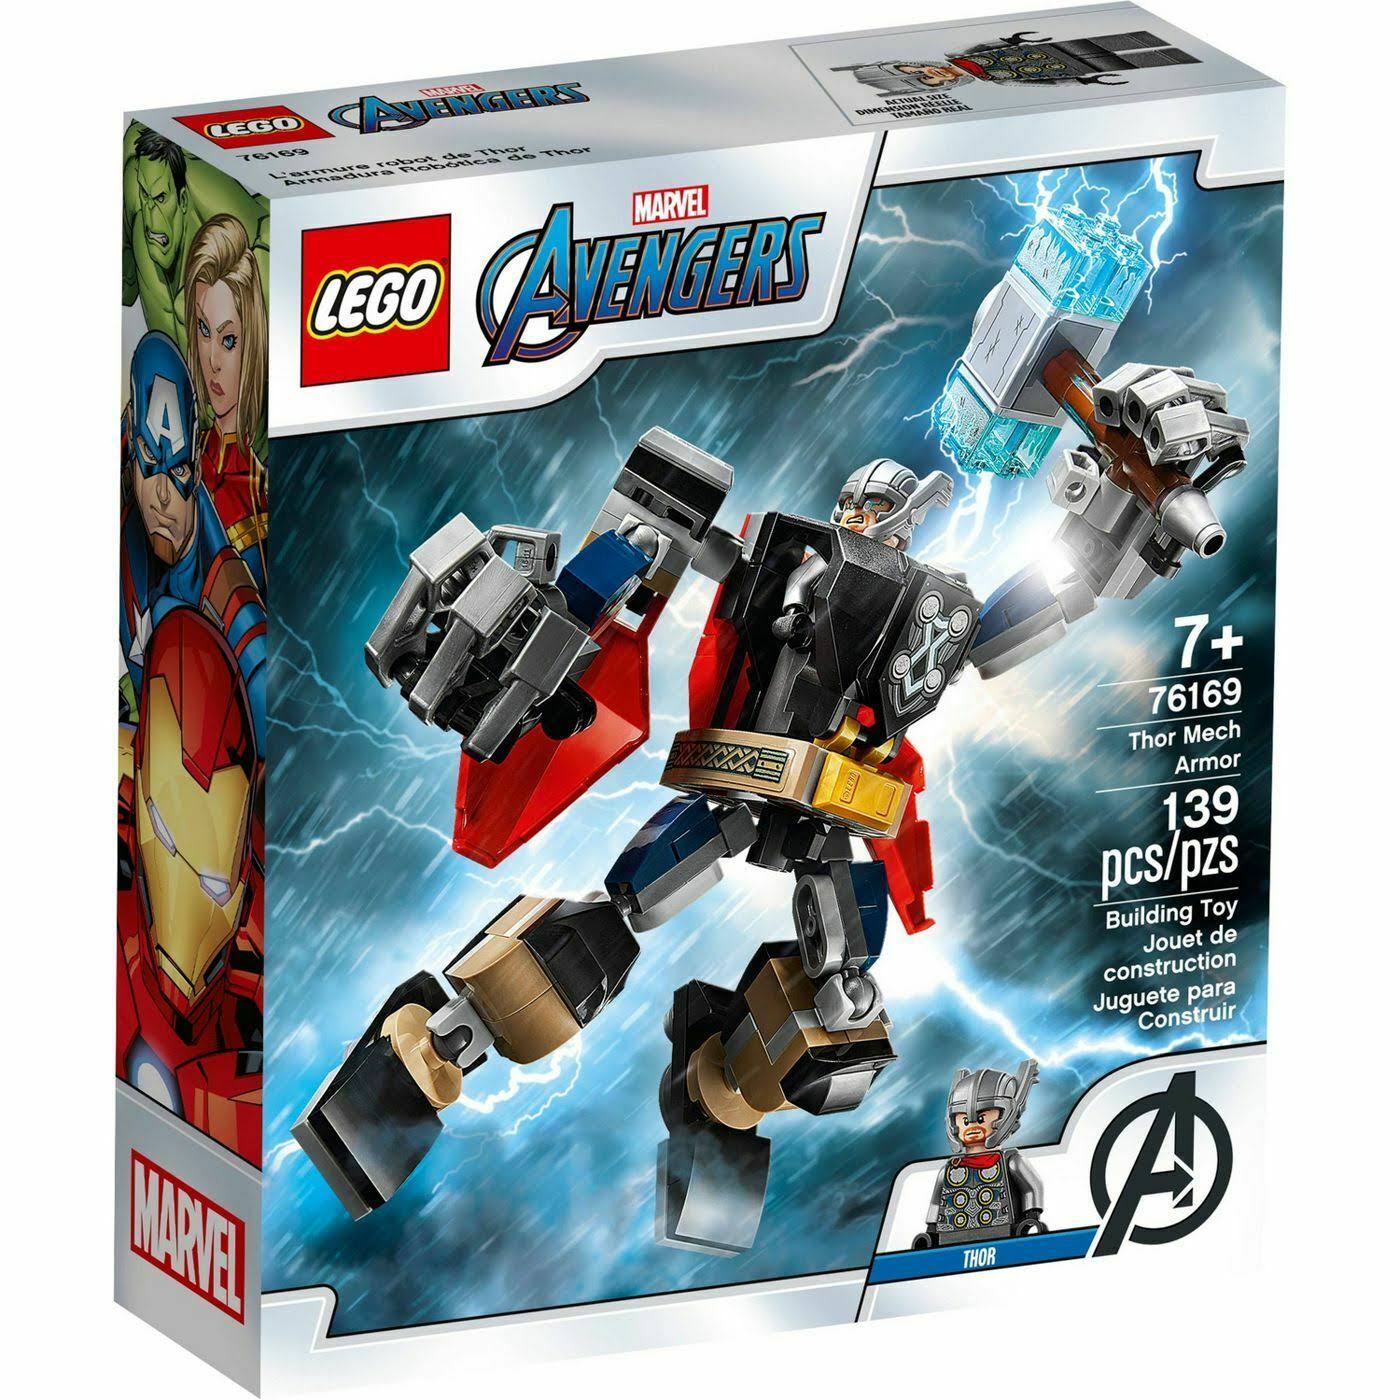 Lego 76169 Marvel Avengers Classic Thor Mech Armor New with Sealed Box